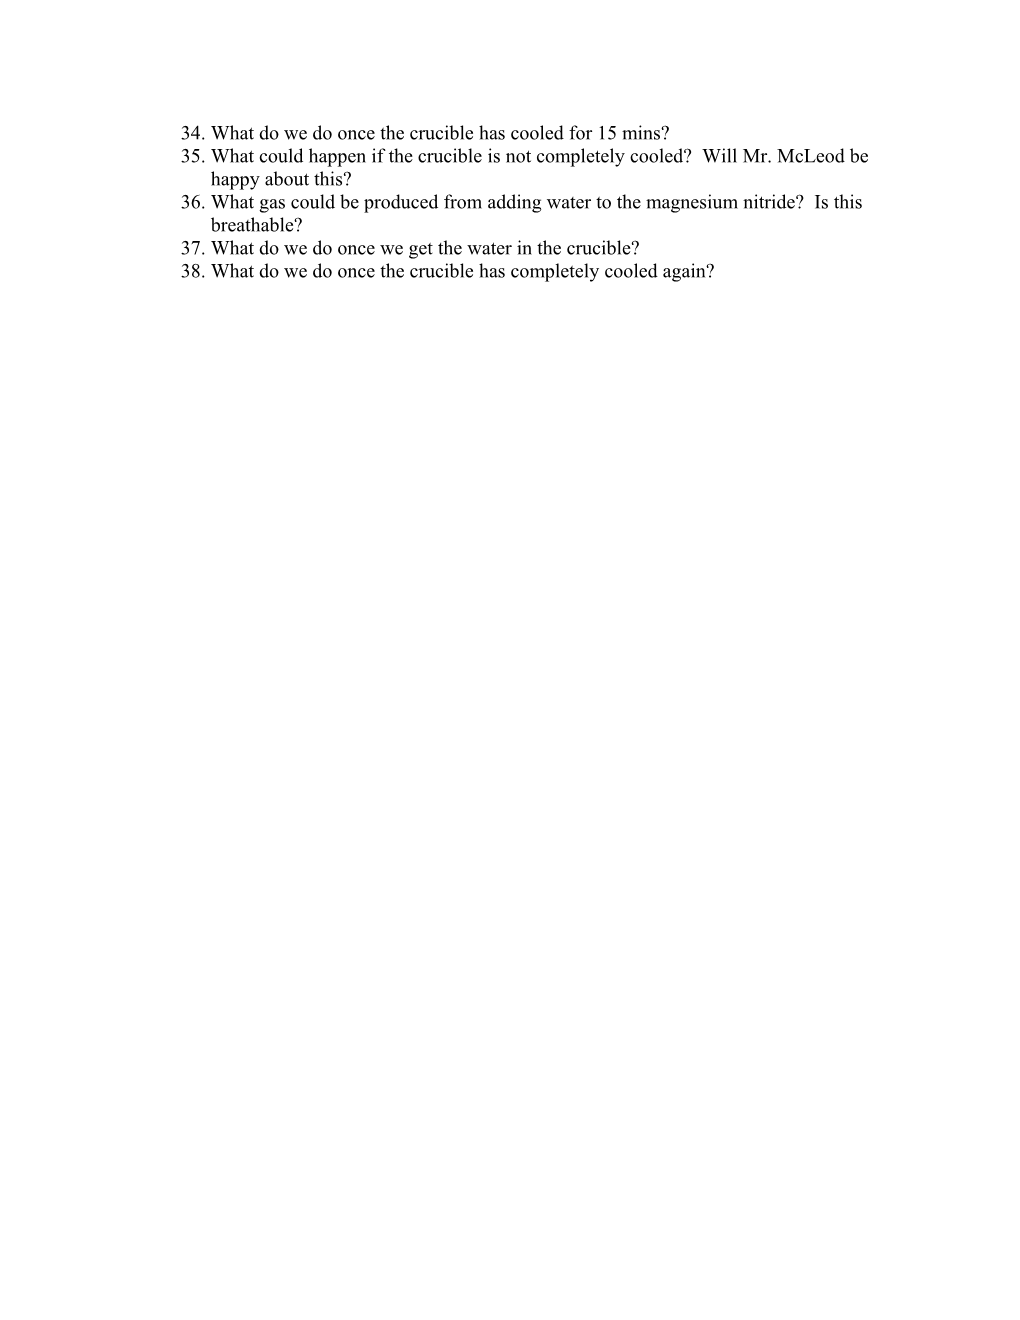 Chemistry Magnesium Oxide Pre-Lab Study Guide 2-1-12